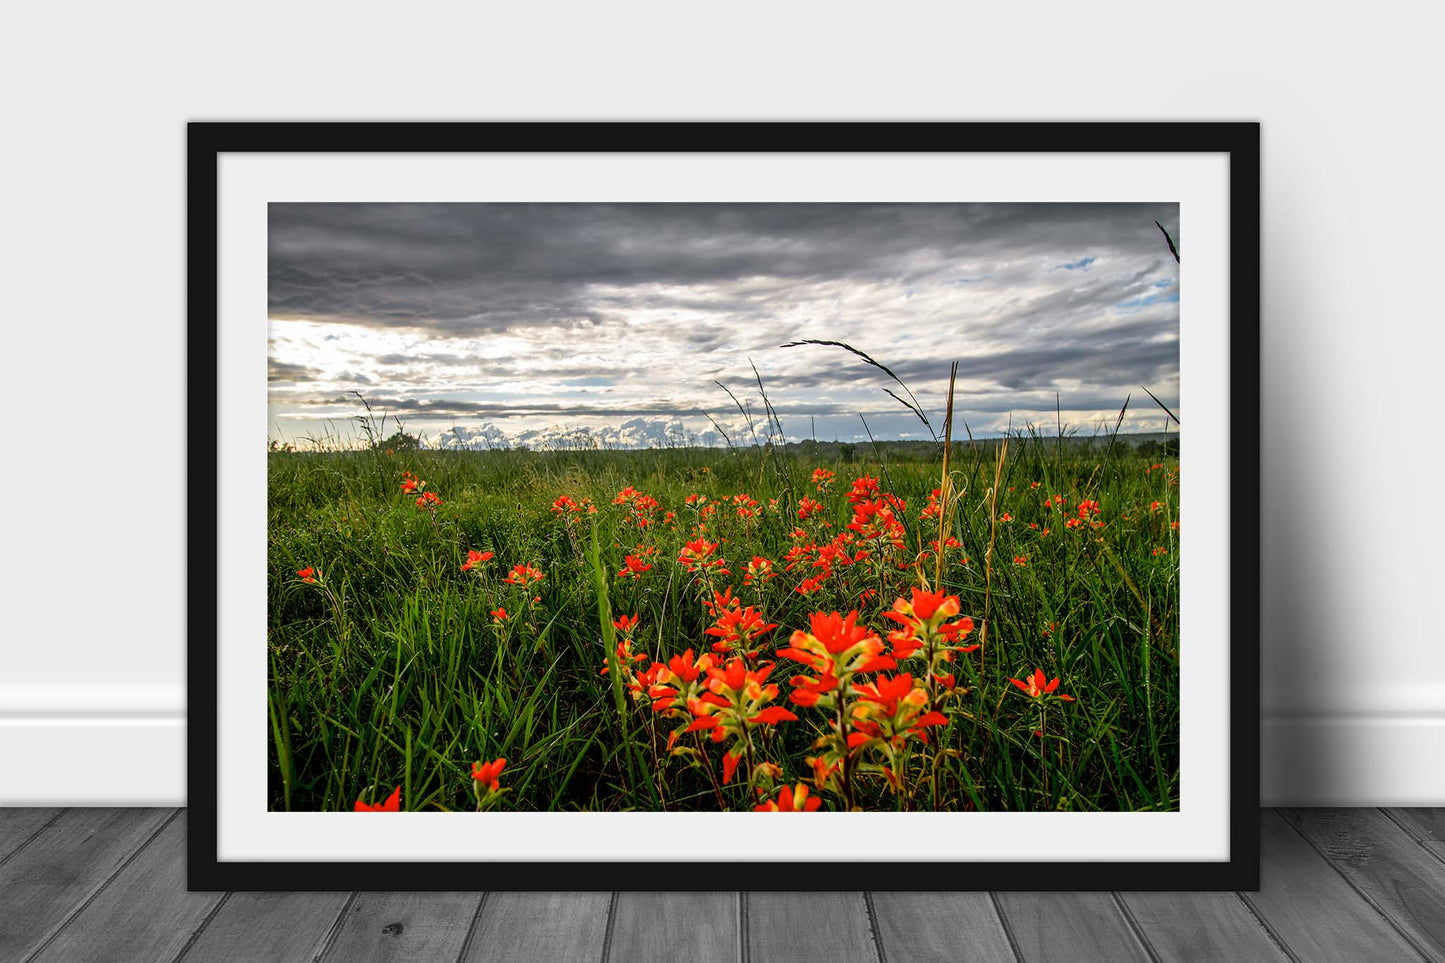 Framed and matted nature photography print of Indian paintbrush wildflowers bringing color to a stormy spring day in Oklahoma by Sean Ramsey of Southern Plains Photography.